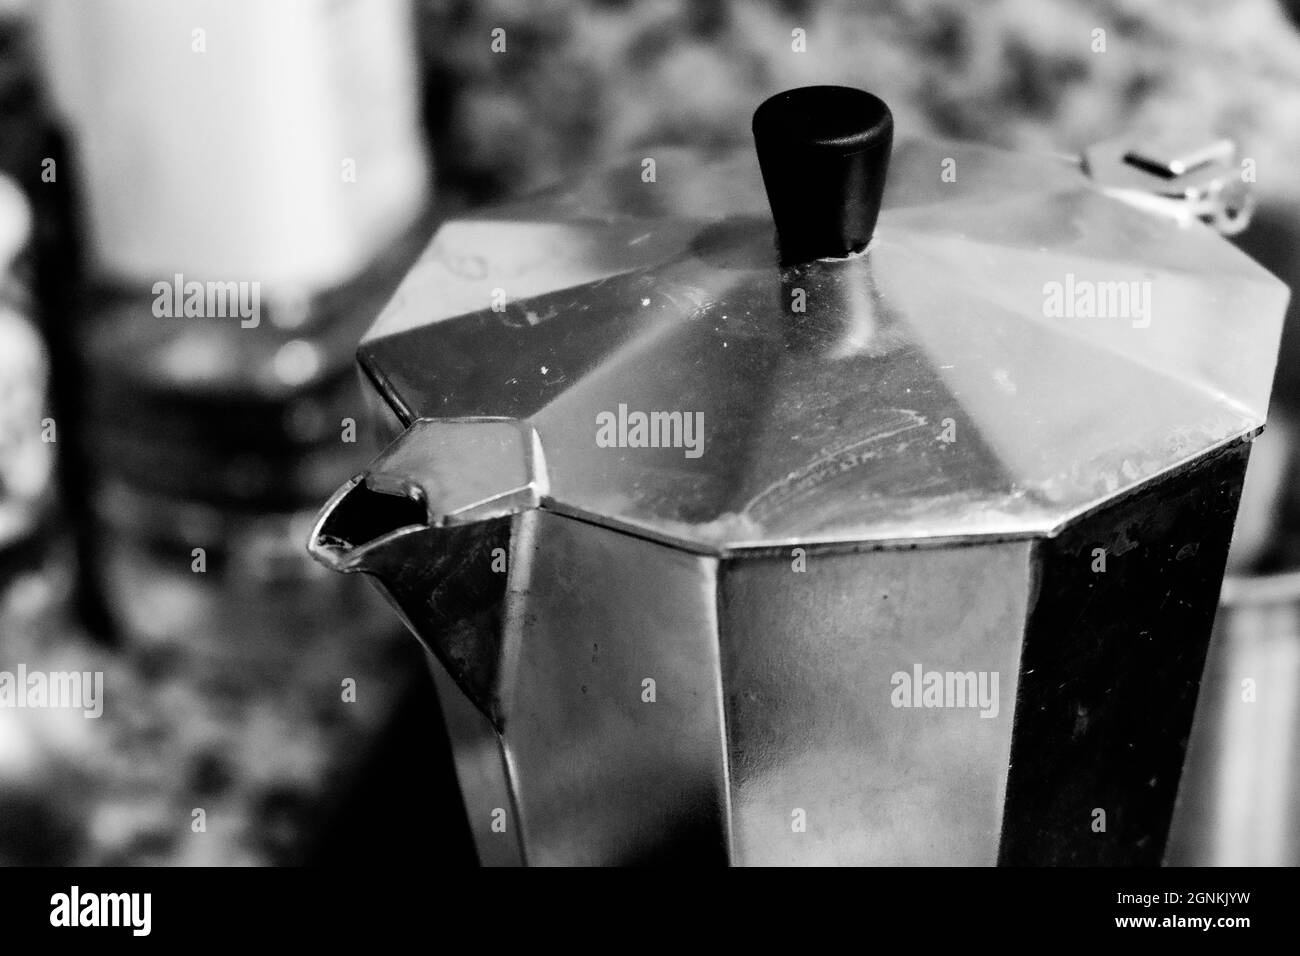 Close Up Black And White Image Of A Coffee Perculator Brewing Fresh Coffee With No People Stock Photo